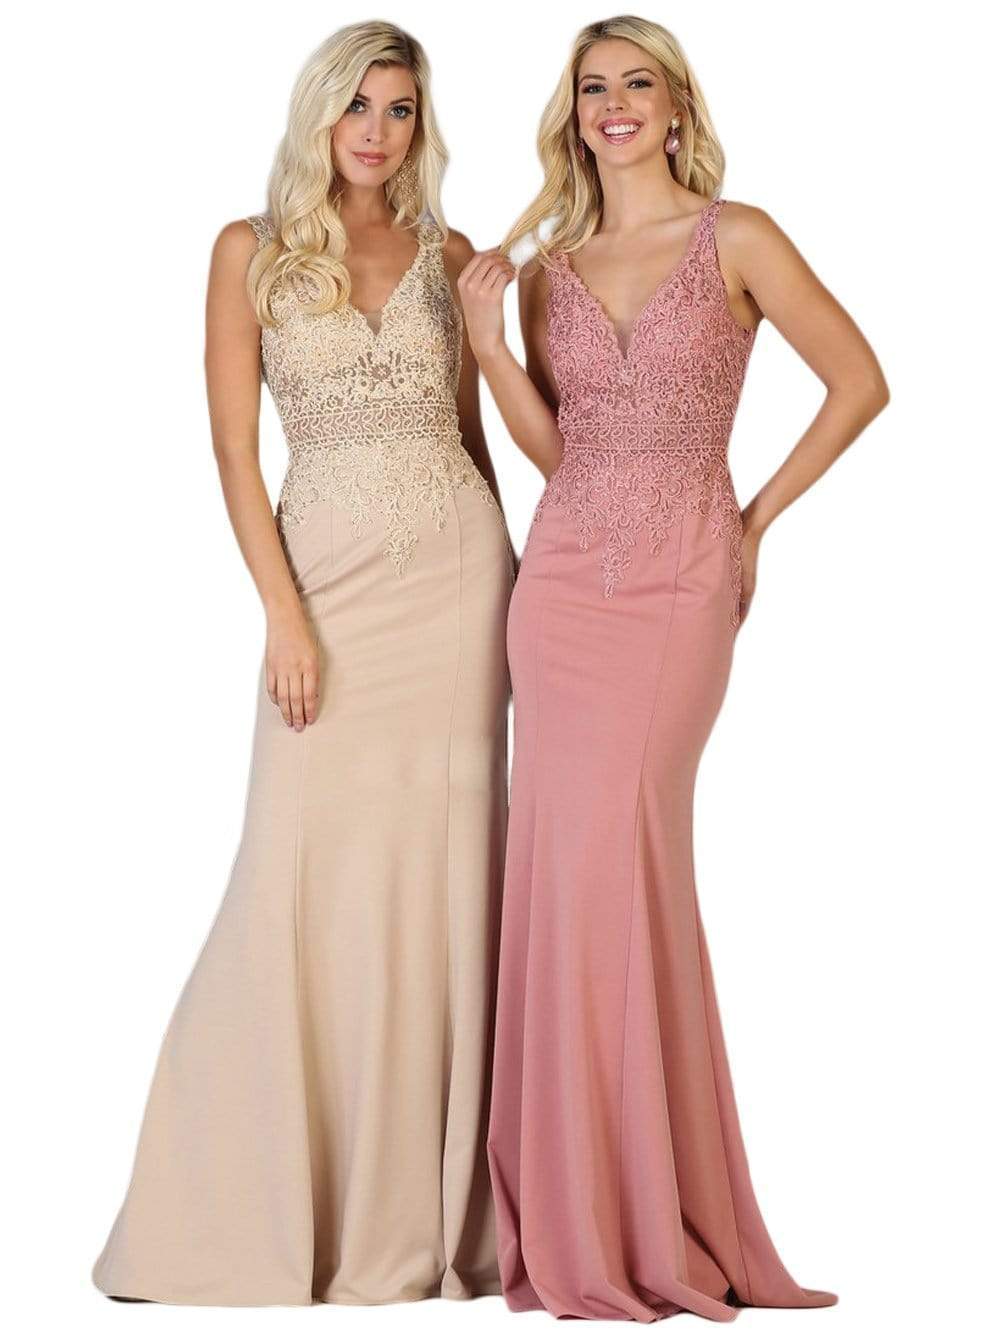 May Queen - MQ1674 Embroidered Plunging V-neck Trumpet Dress Bridesmaid Dresses